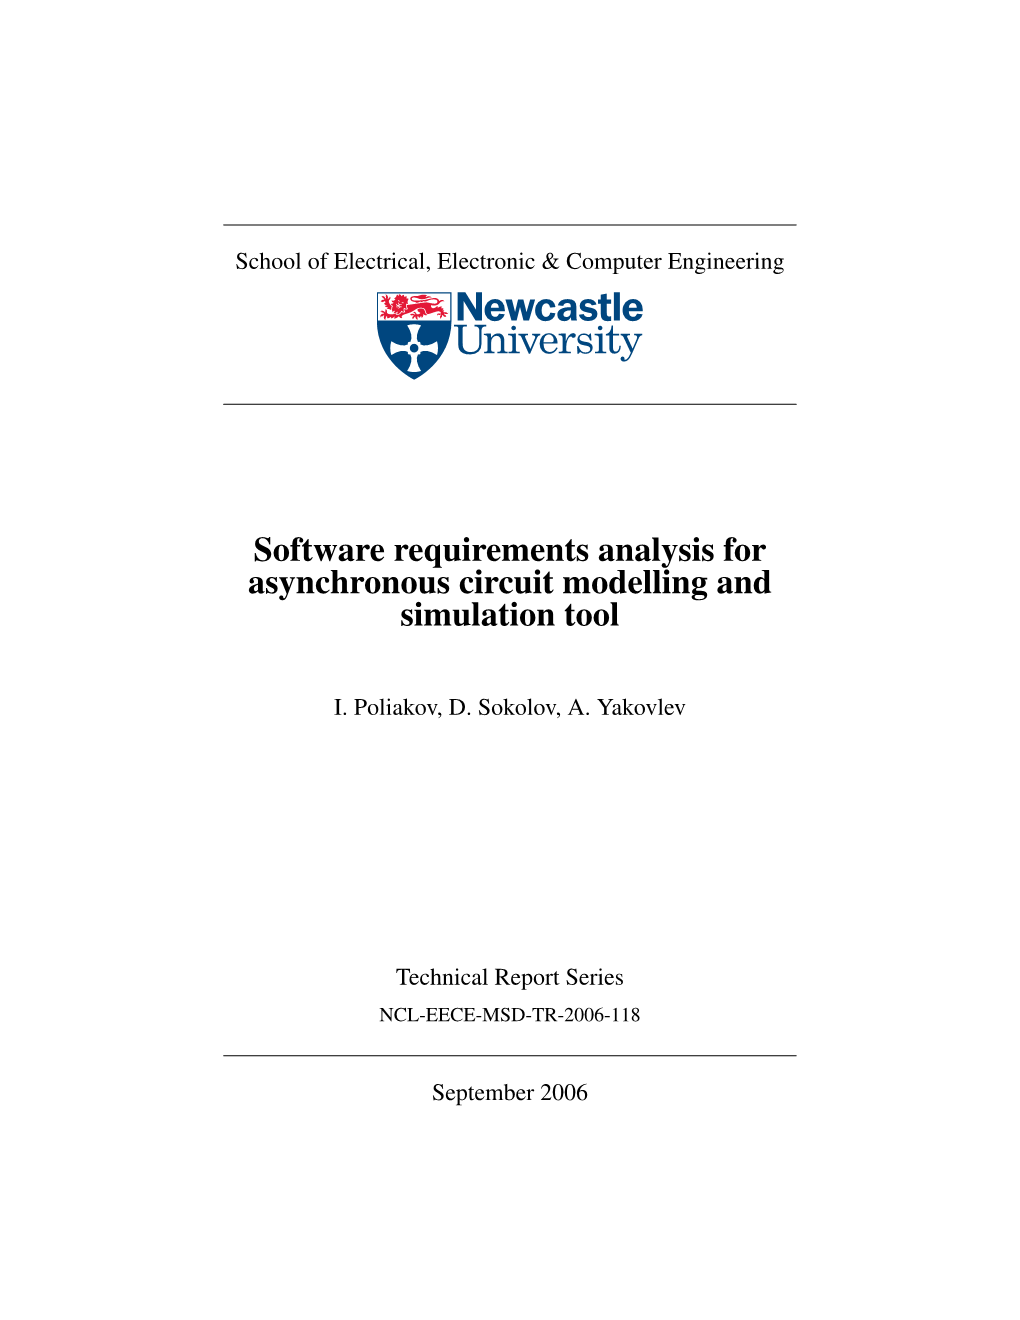 Software Requirements Analysis for Asynchronous Circuit Modelling and Simulation Tool